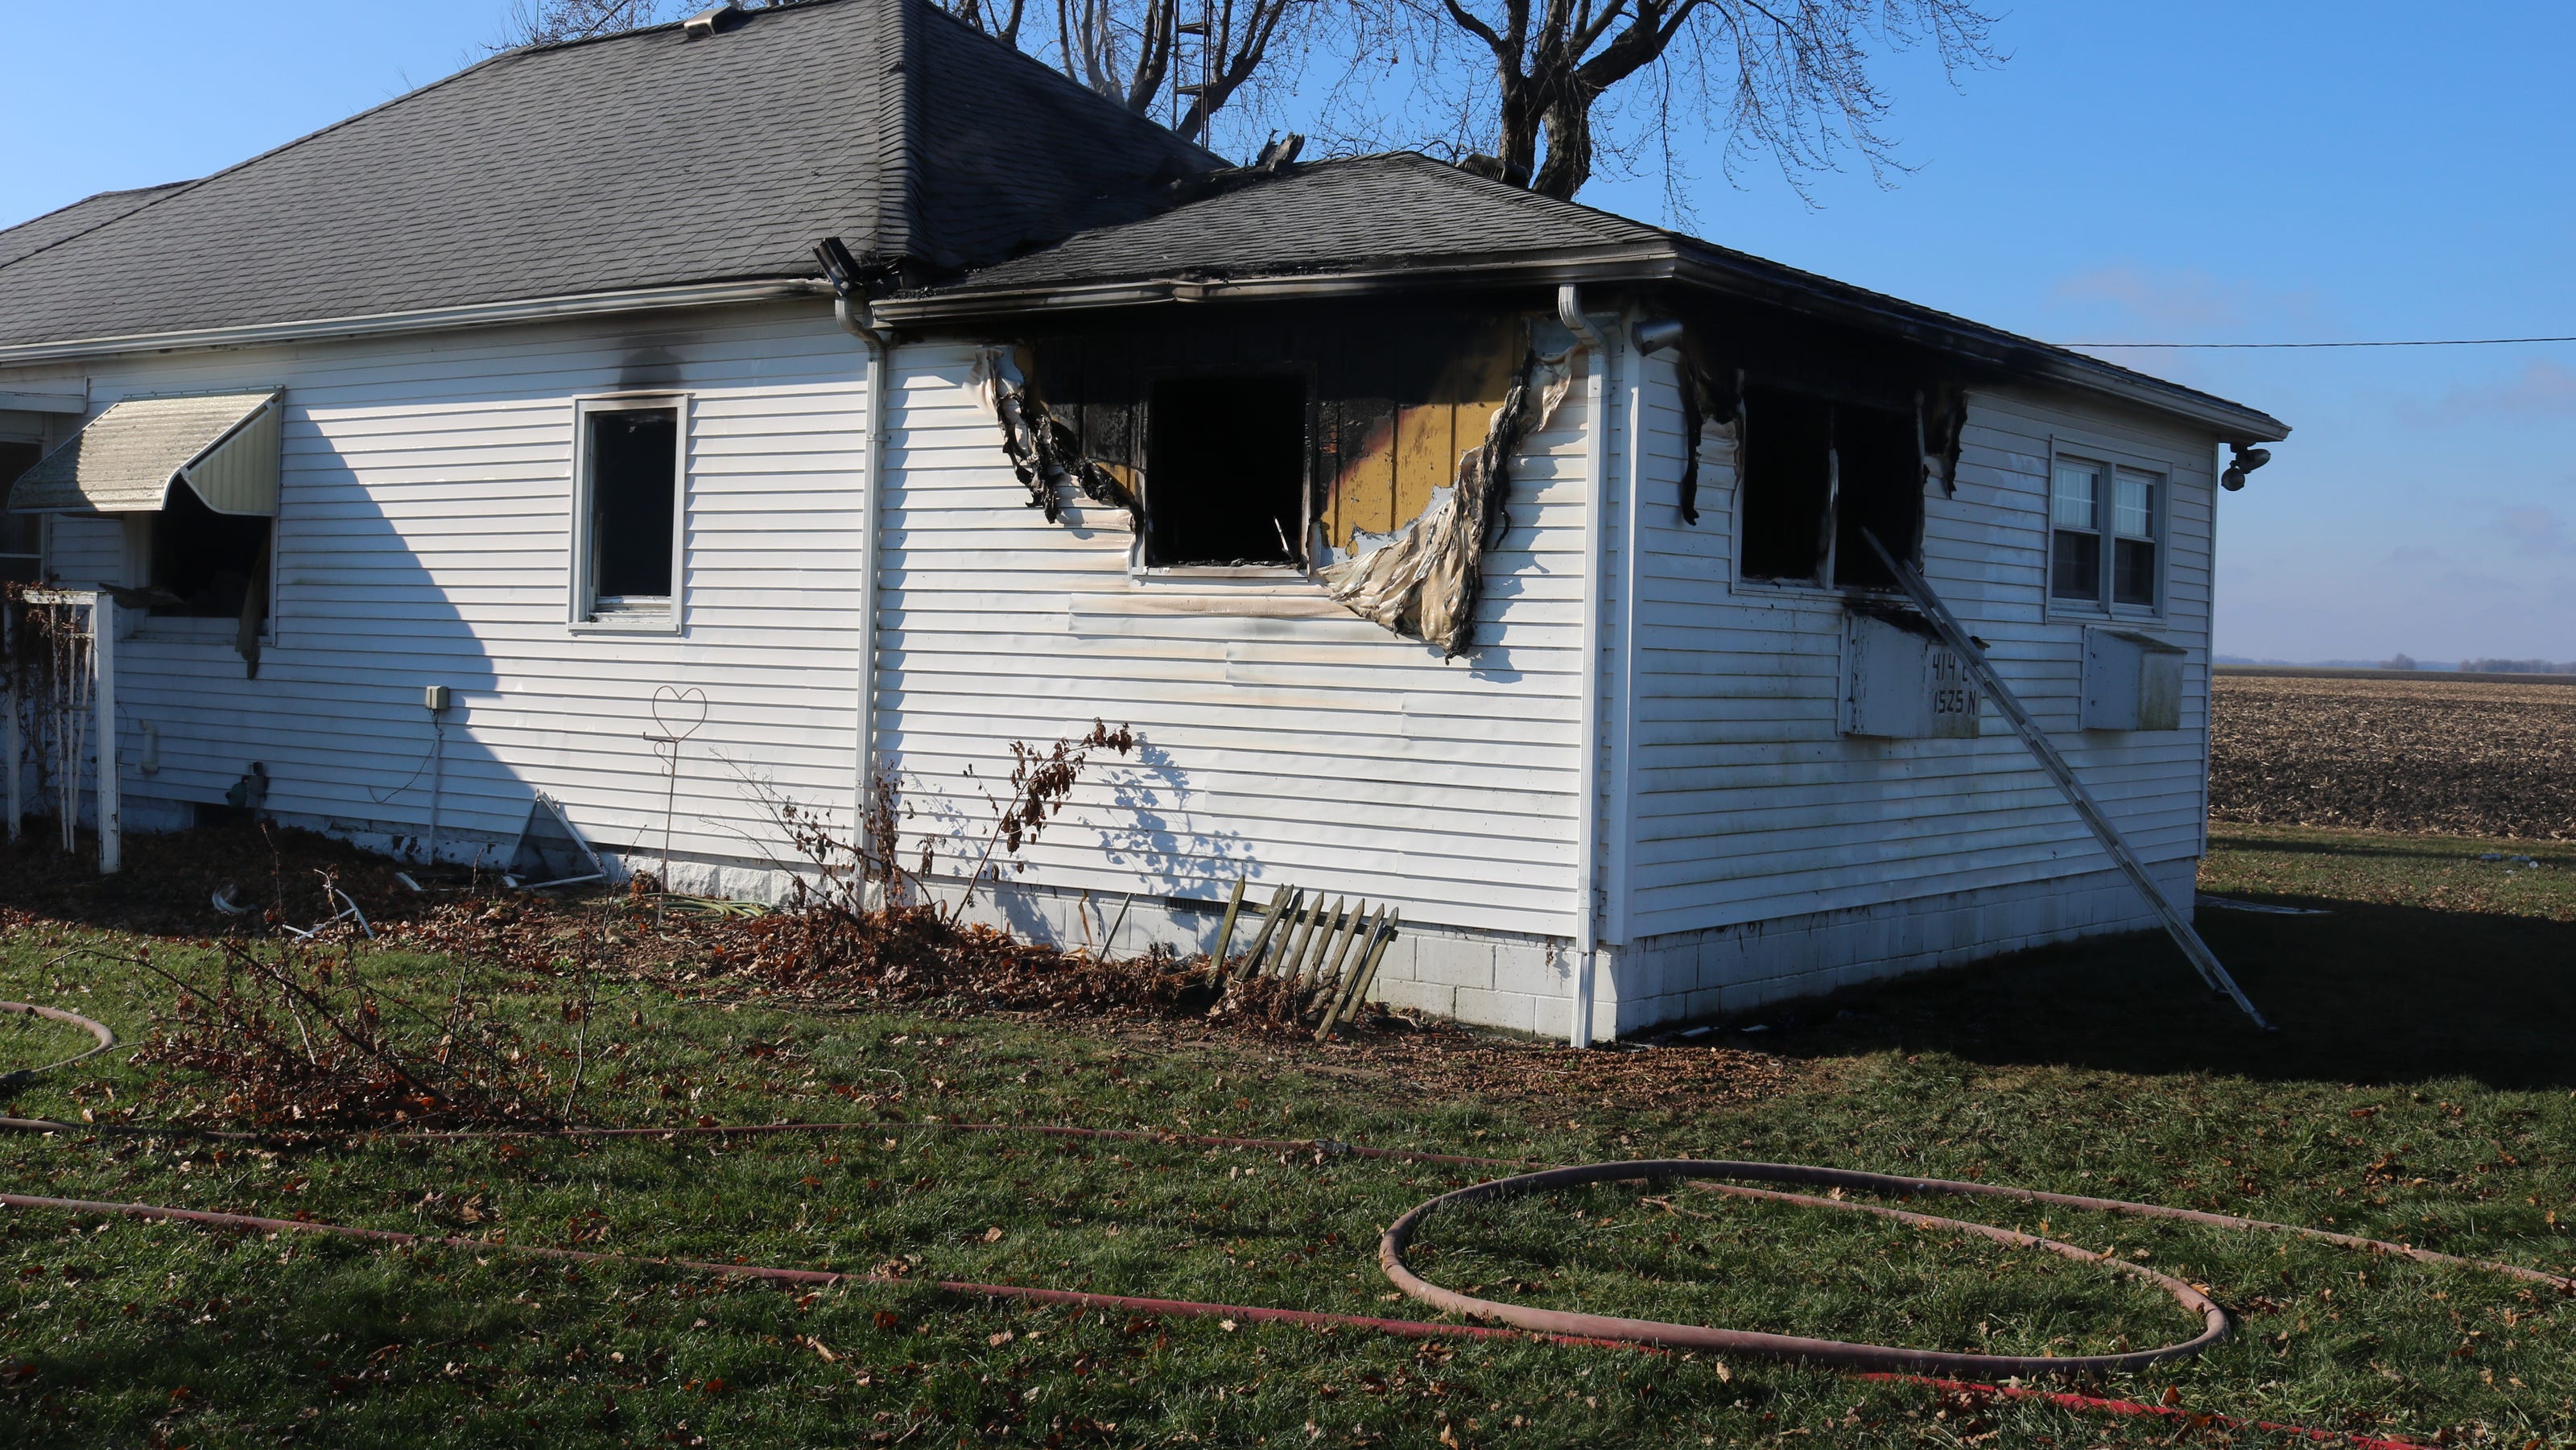  Two people who died as a result of house fire in rural Christian County identified 